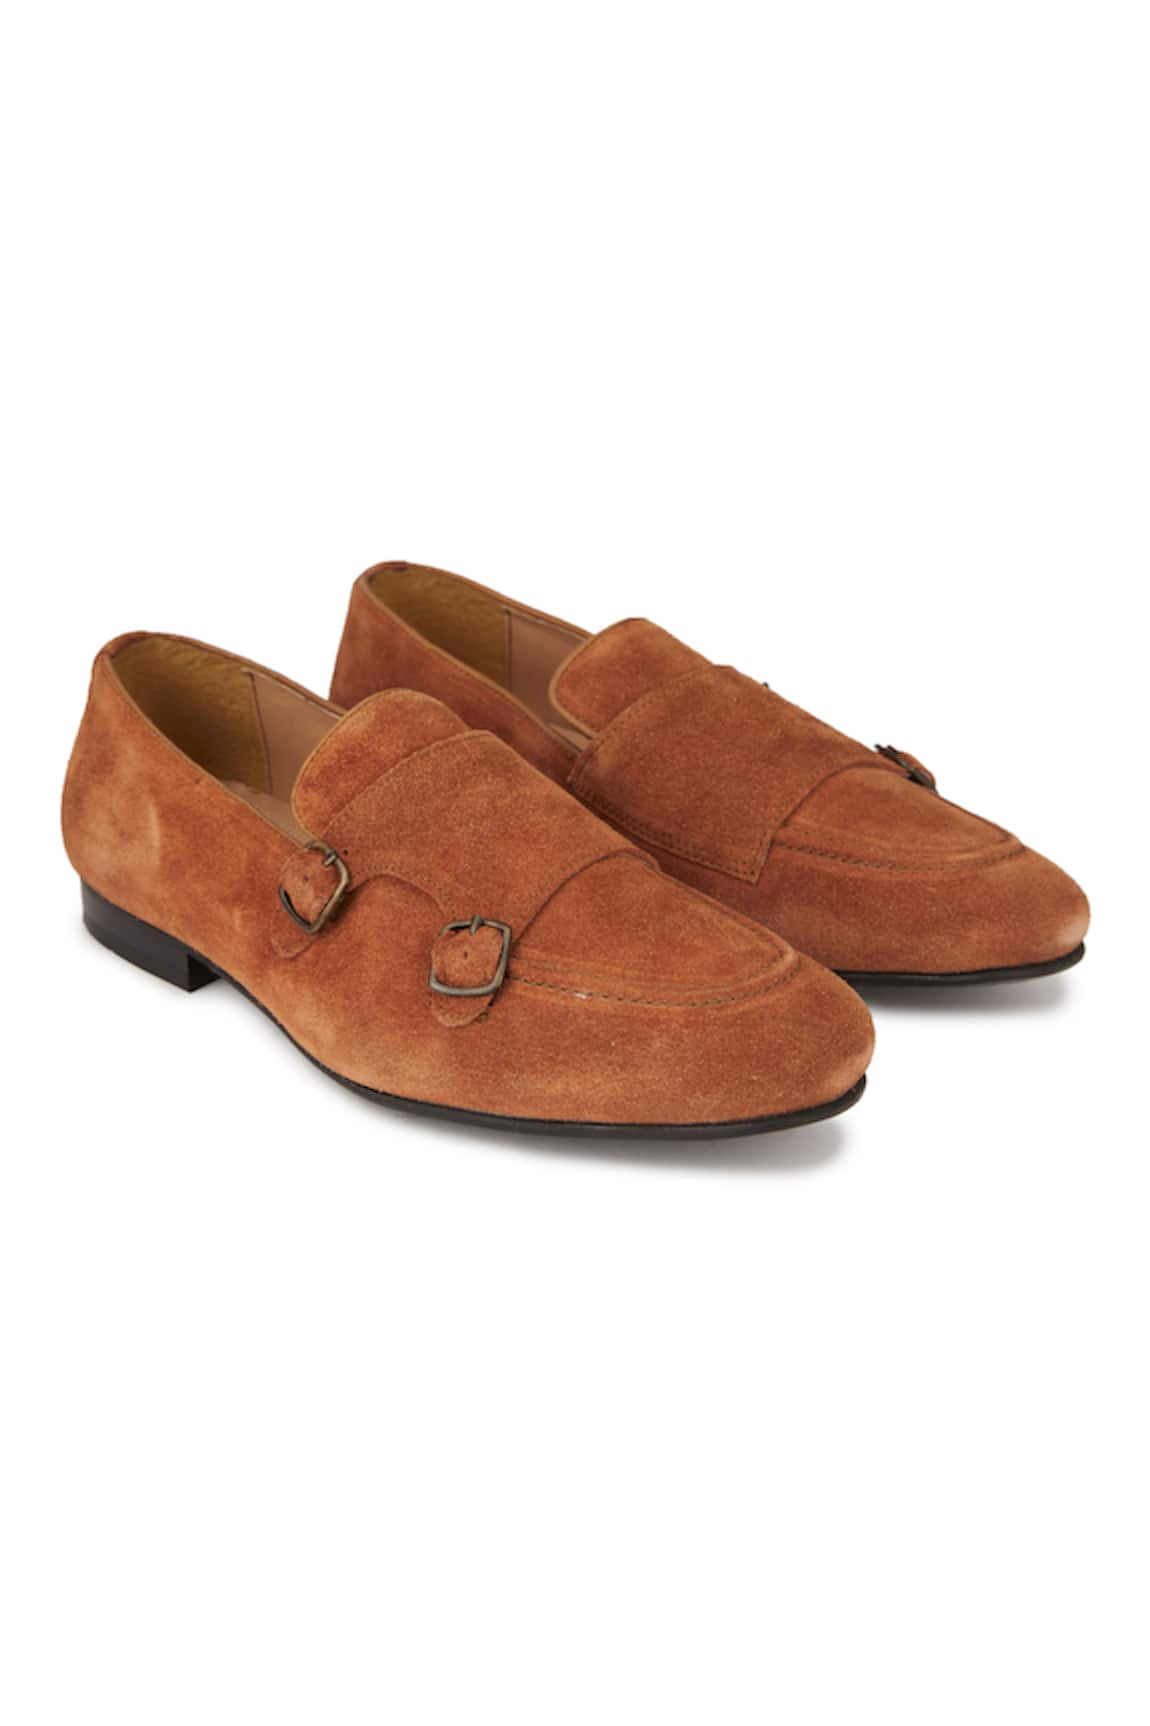 Hats Off Accessories Buckle Embellished Monk Loafers